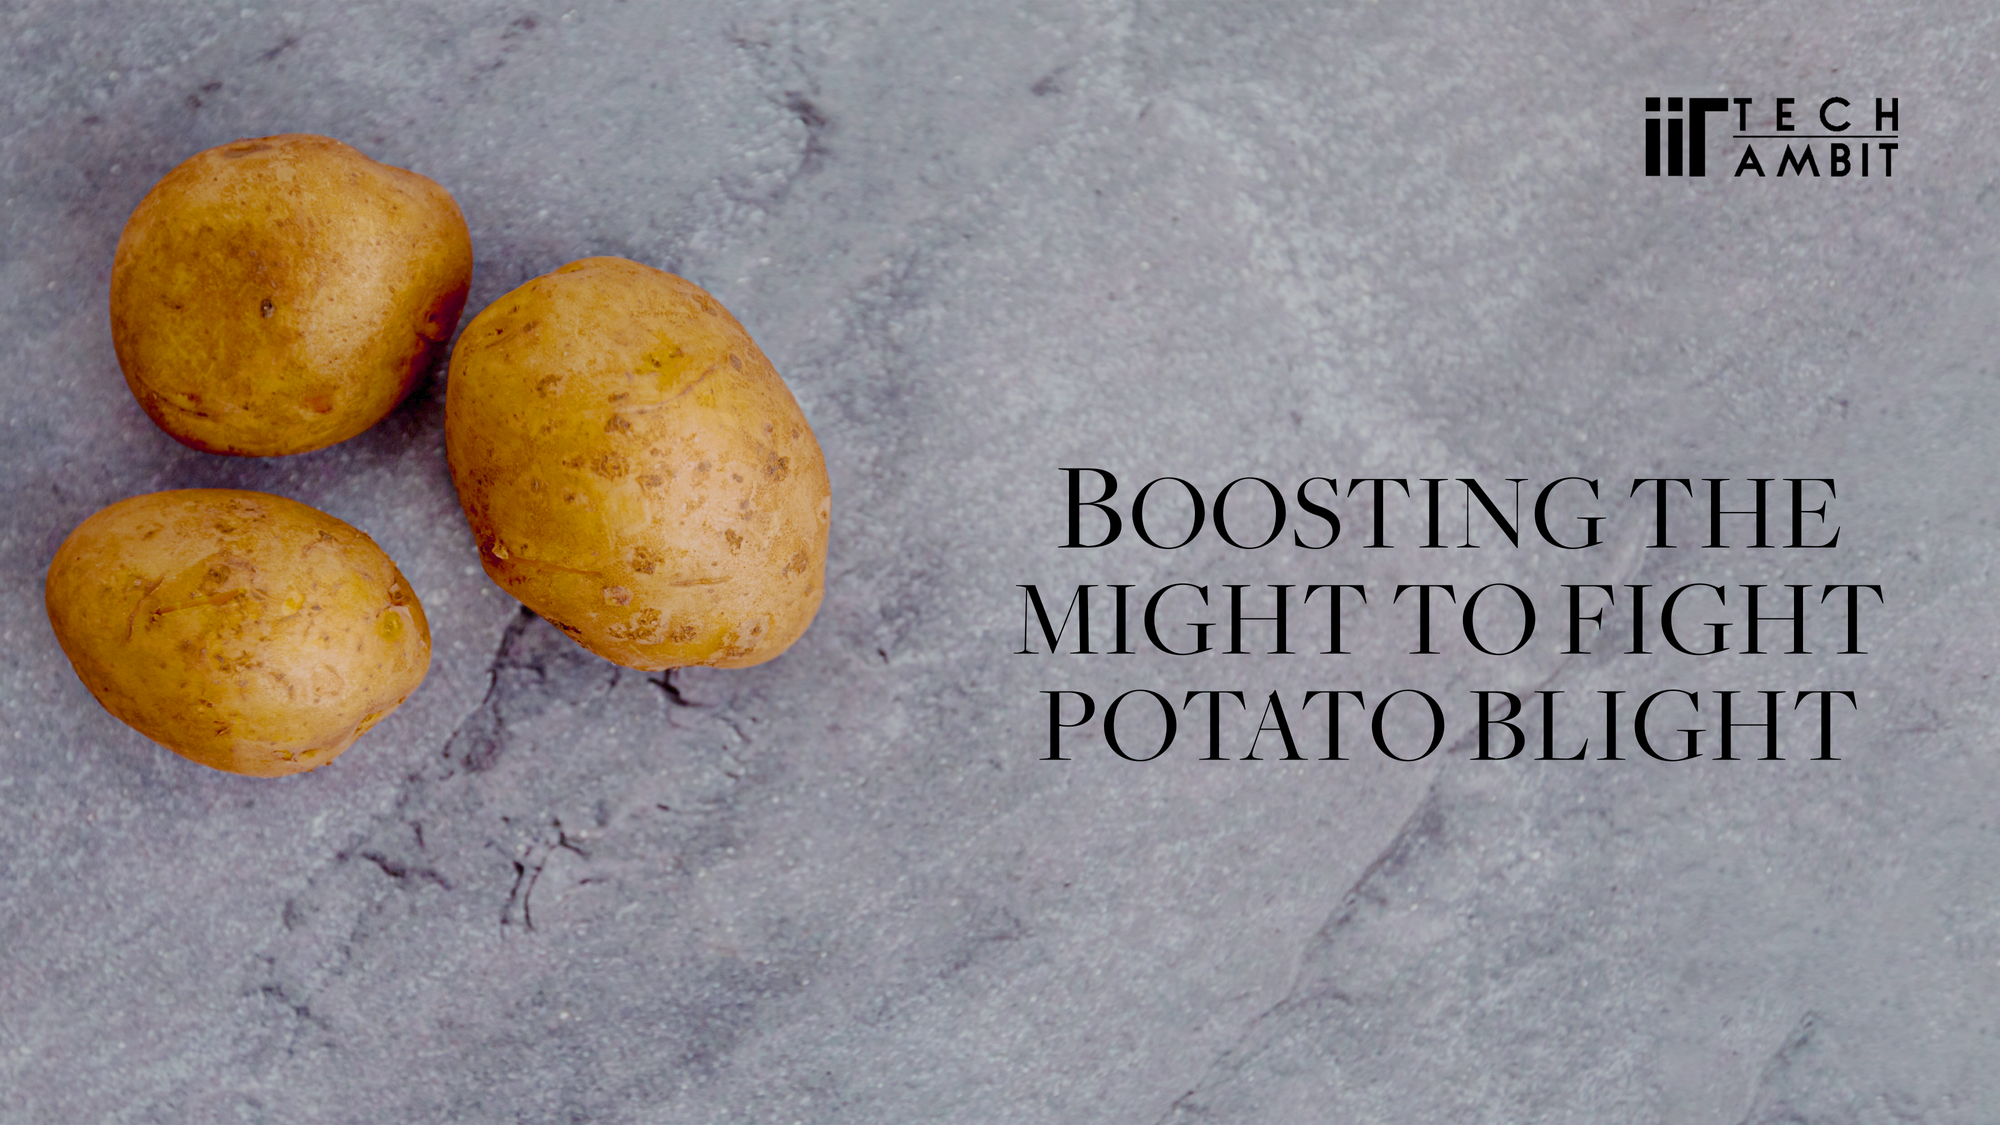 Boosting the Might to Fight Potato Blight